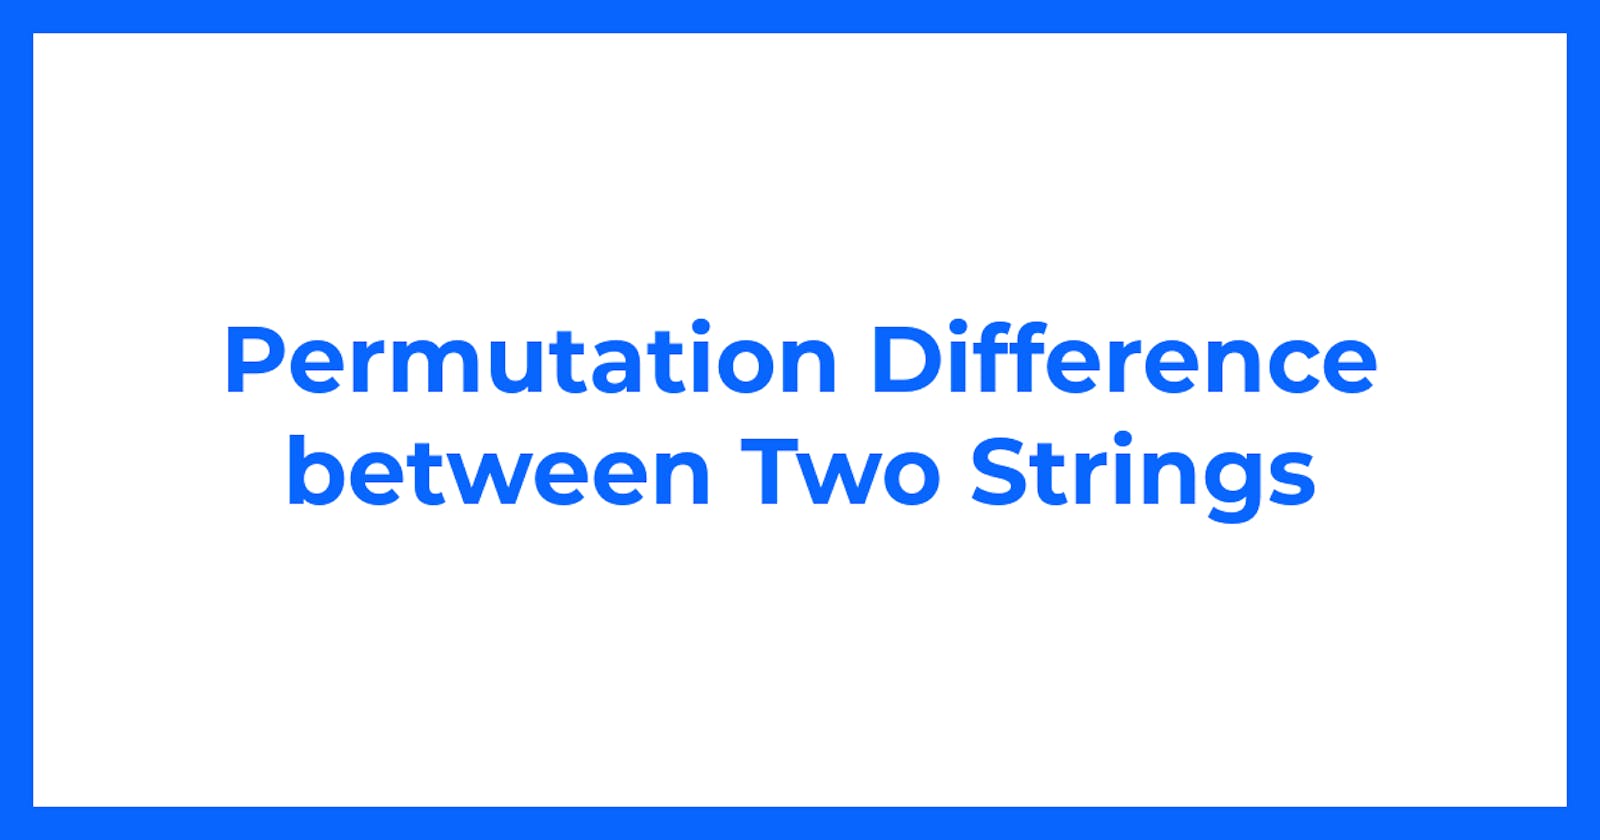 Permutation Difference between Two Strings